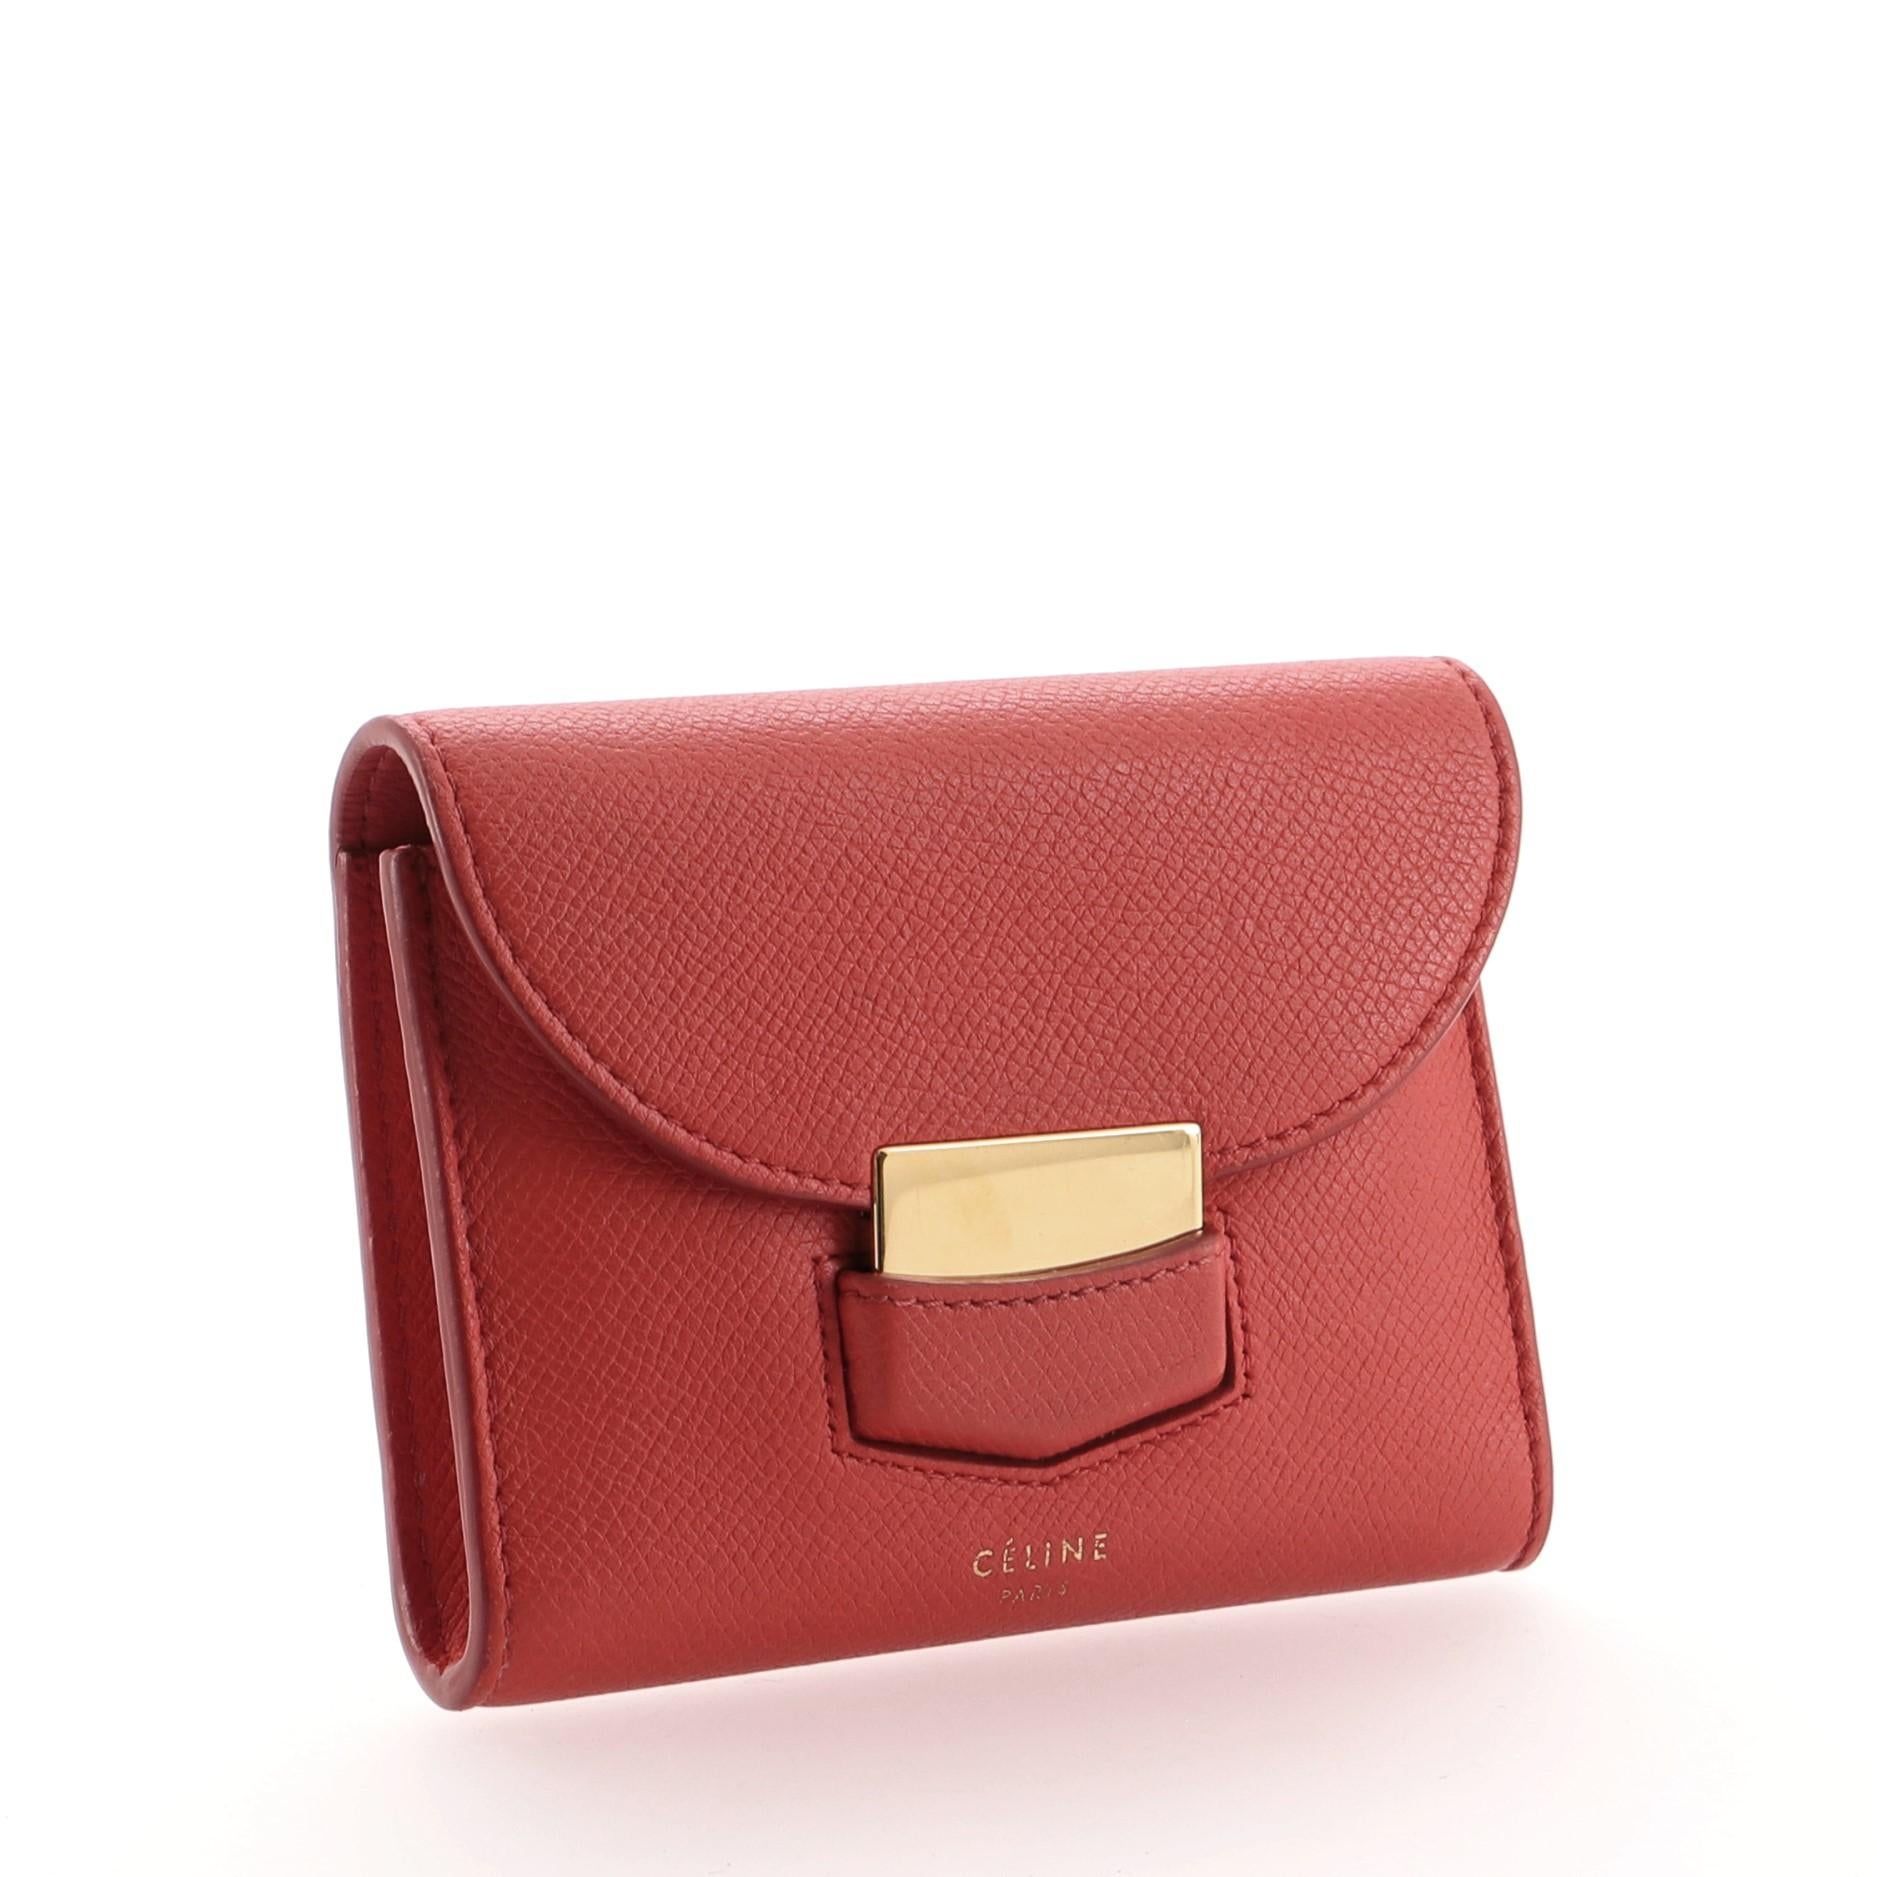 Celine Trotteur Flap Wallet Leather Small
Red

Condition Details: Minor wear, darkening and small marks on exterior and in interior, splitting on opening flap corner wax edges. Light cracking on side opening wax edges, creasing and scuffs underneath